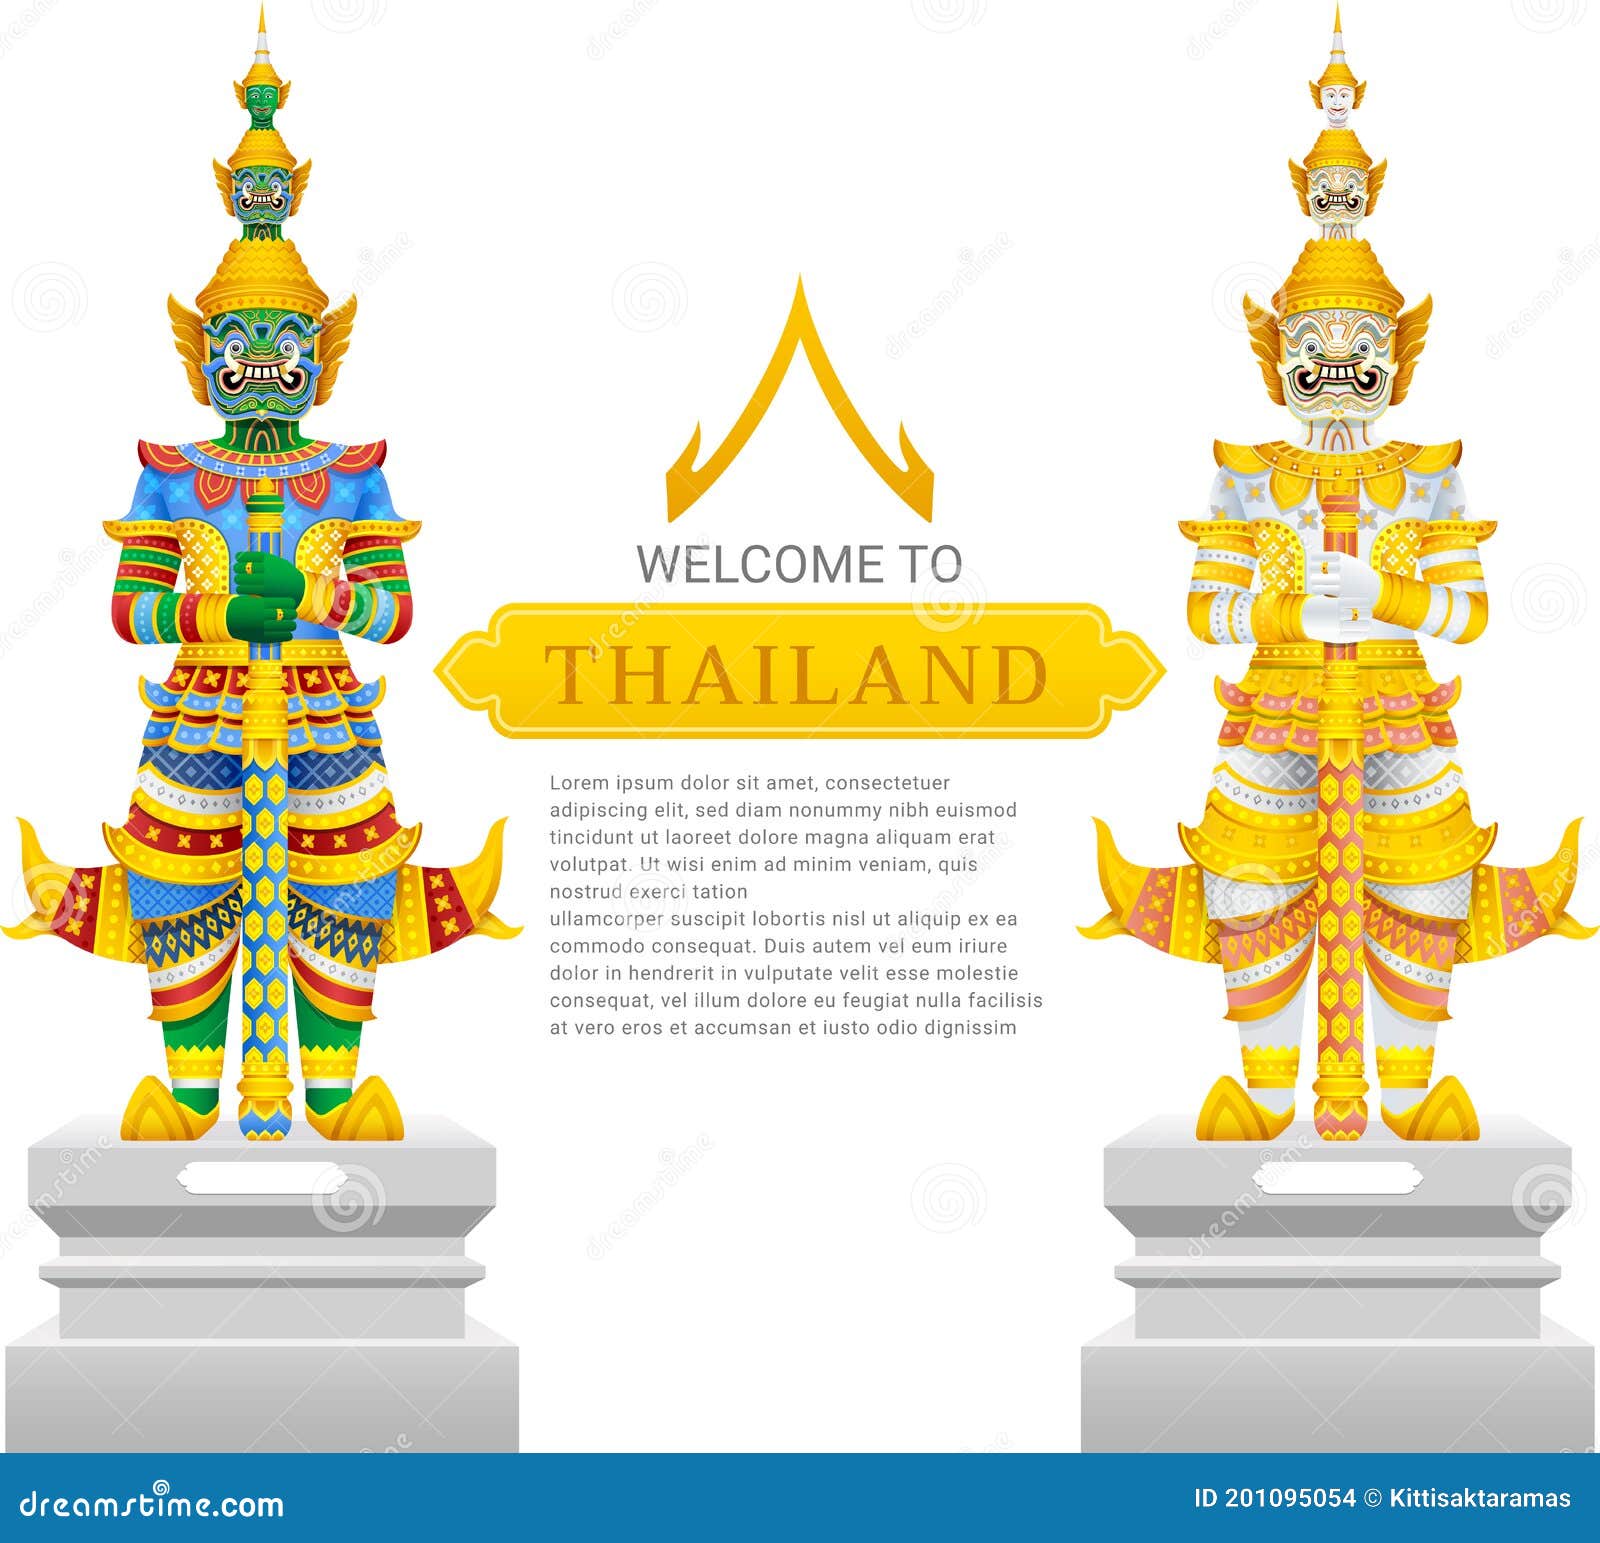 guardian giant thailand travel and art background  